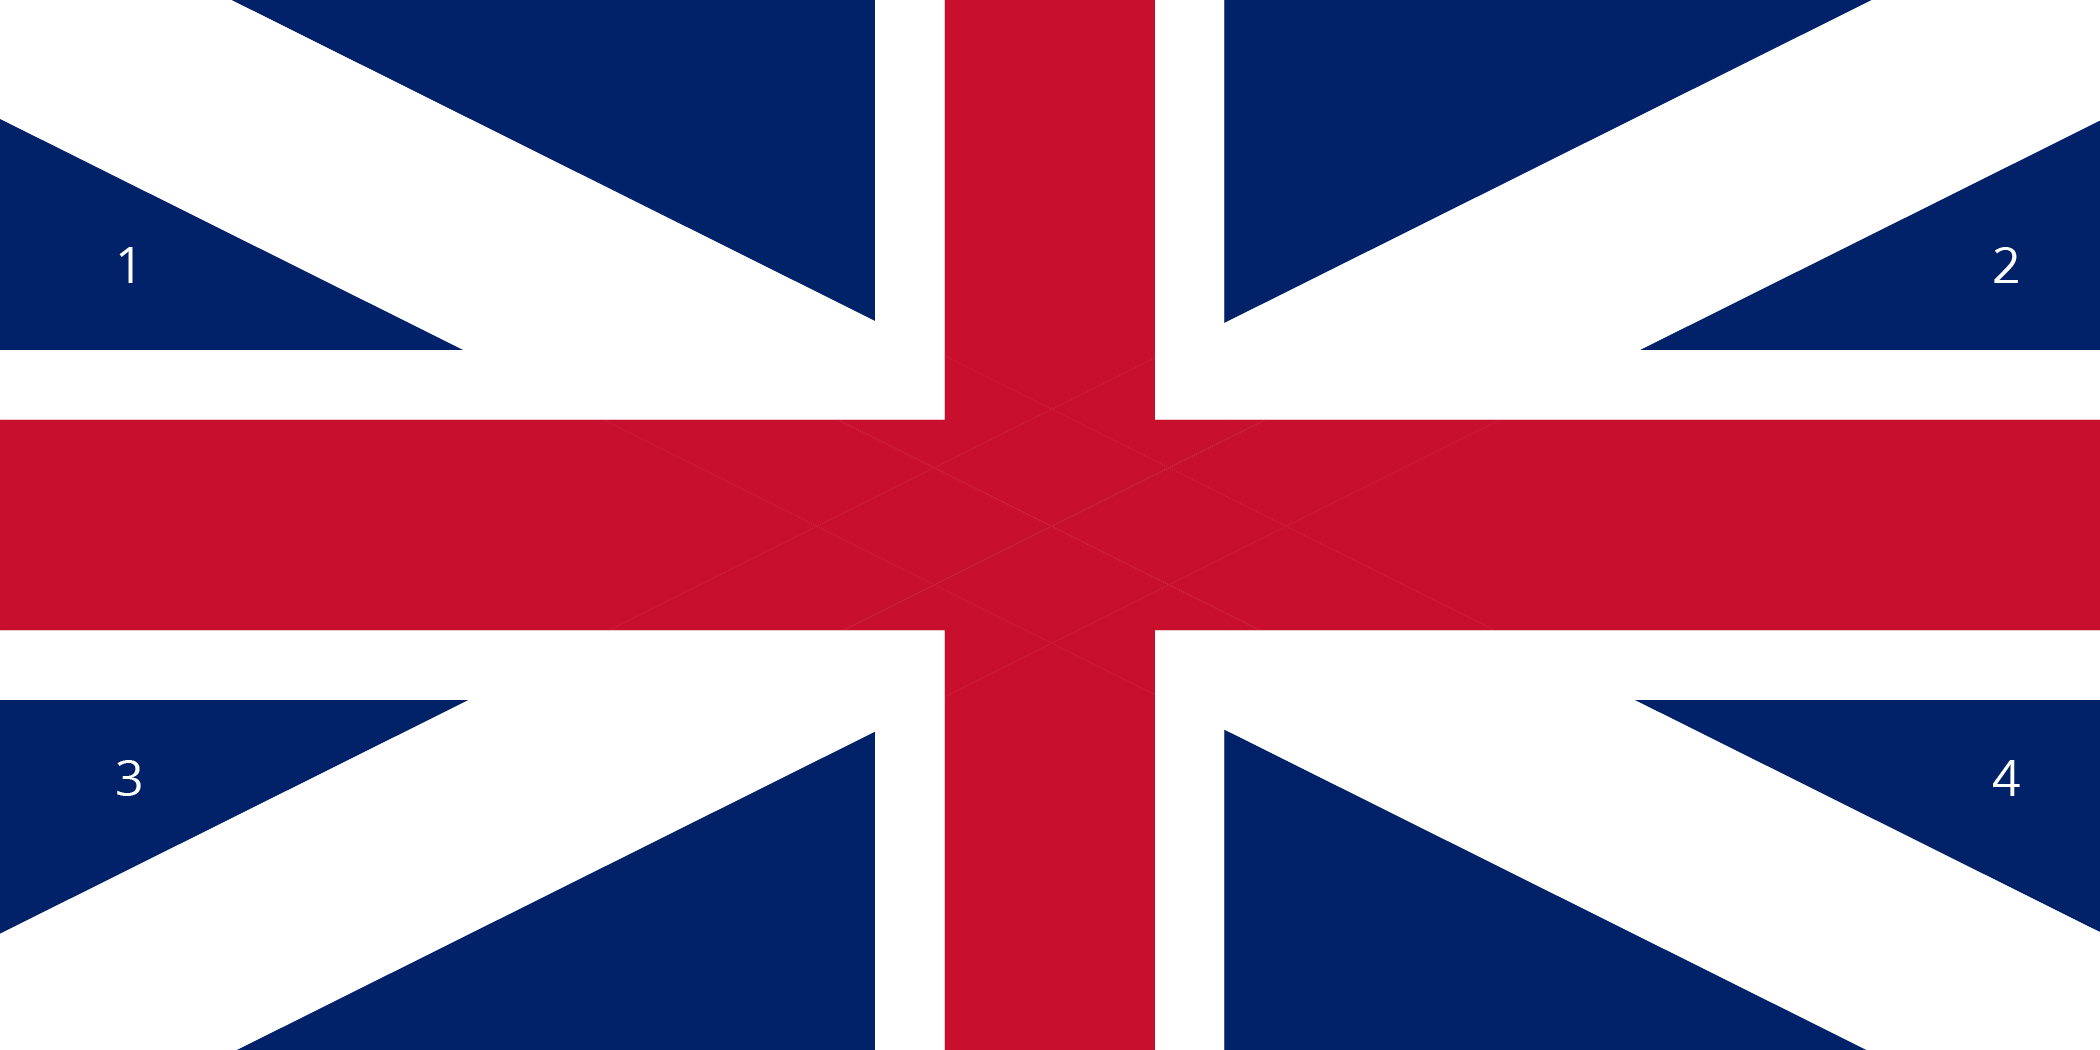 An image of an older version of the flag of Great Britain. The flag is a rectangle with a vertical length about twice the width. Red stripes divide the flag in half vertically and horizontally. White stripes connect the vertices along diagonals, crossing behind the red stripes. The remaining area is composed of 8 blue right triangles.   At the top of the flag, 2 large right triangles line up on either side of the vertical red stripe by their shorter square sides, so that they are mirror images of each other. At the bottom of the flag, 2 large right triangles line up on either side of the vertical red stripe by their shorter square sides, so that they are mirror images of each other.   At the left side, 2 small right triangles line up on either side of the horizontal red stripe by their longer square sides so that they are mirror images of each other. The triangle above the red stripe is labeled 1; the triangle below the red strip is labeled 3. At the right side, 2 small right triangles line up on either side of the horizontal red stripe by their longer square sides so that they are mirror images of each other. The triangle above the red stripe is labeled 2; the triangle below the red strip is labeled 4.